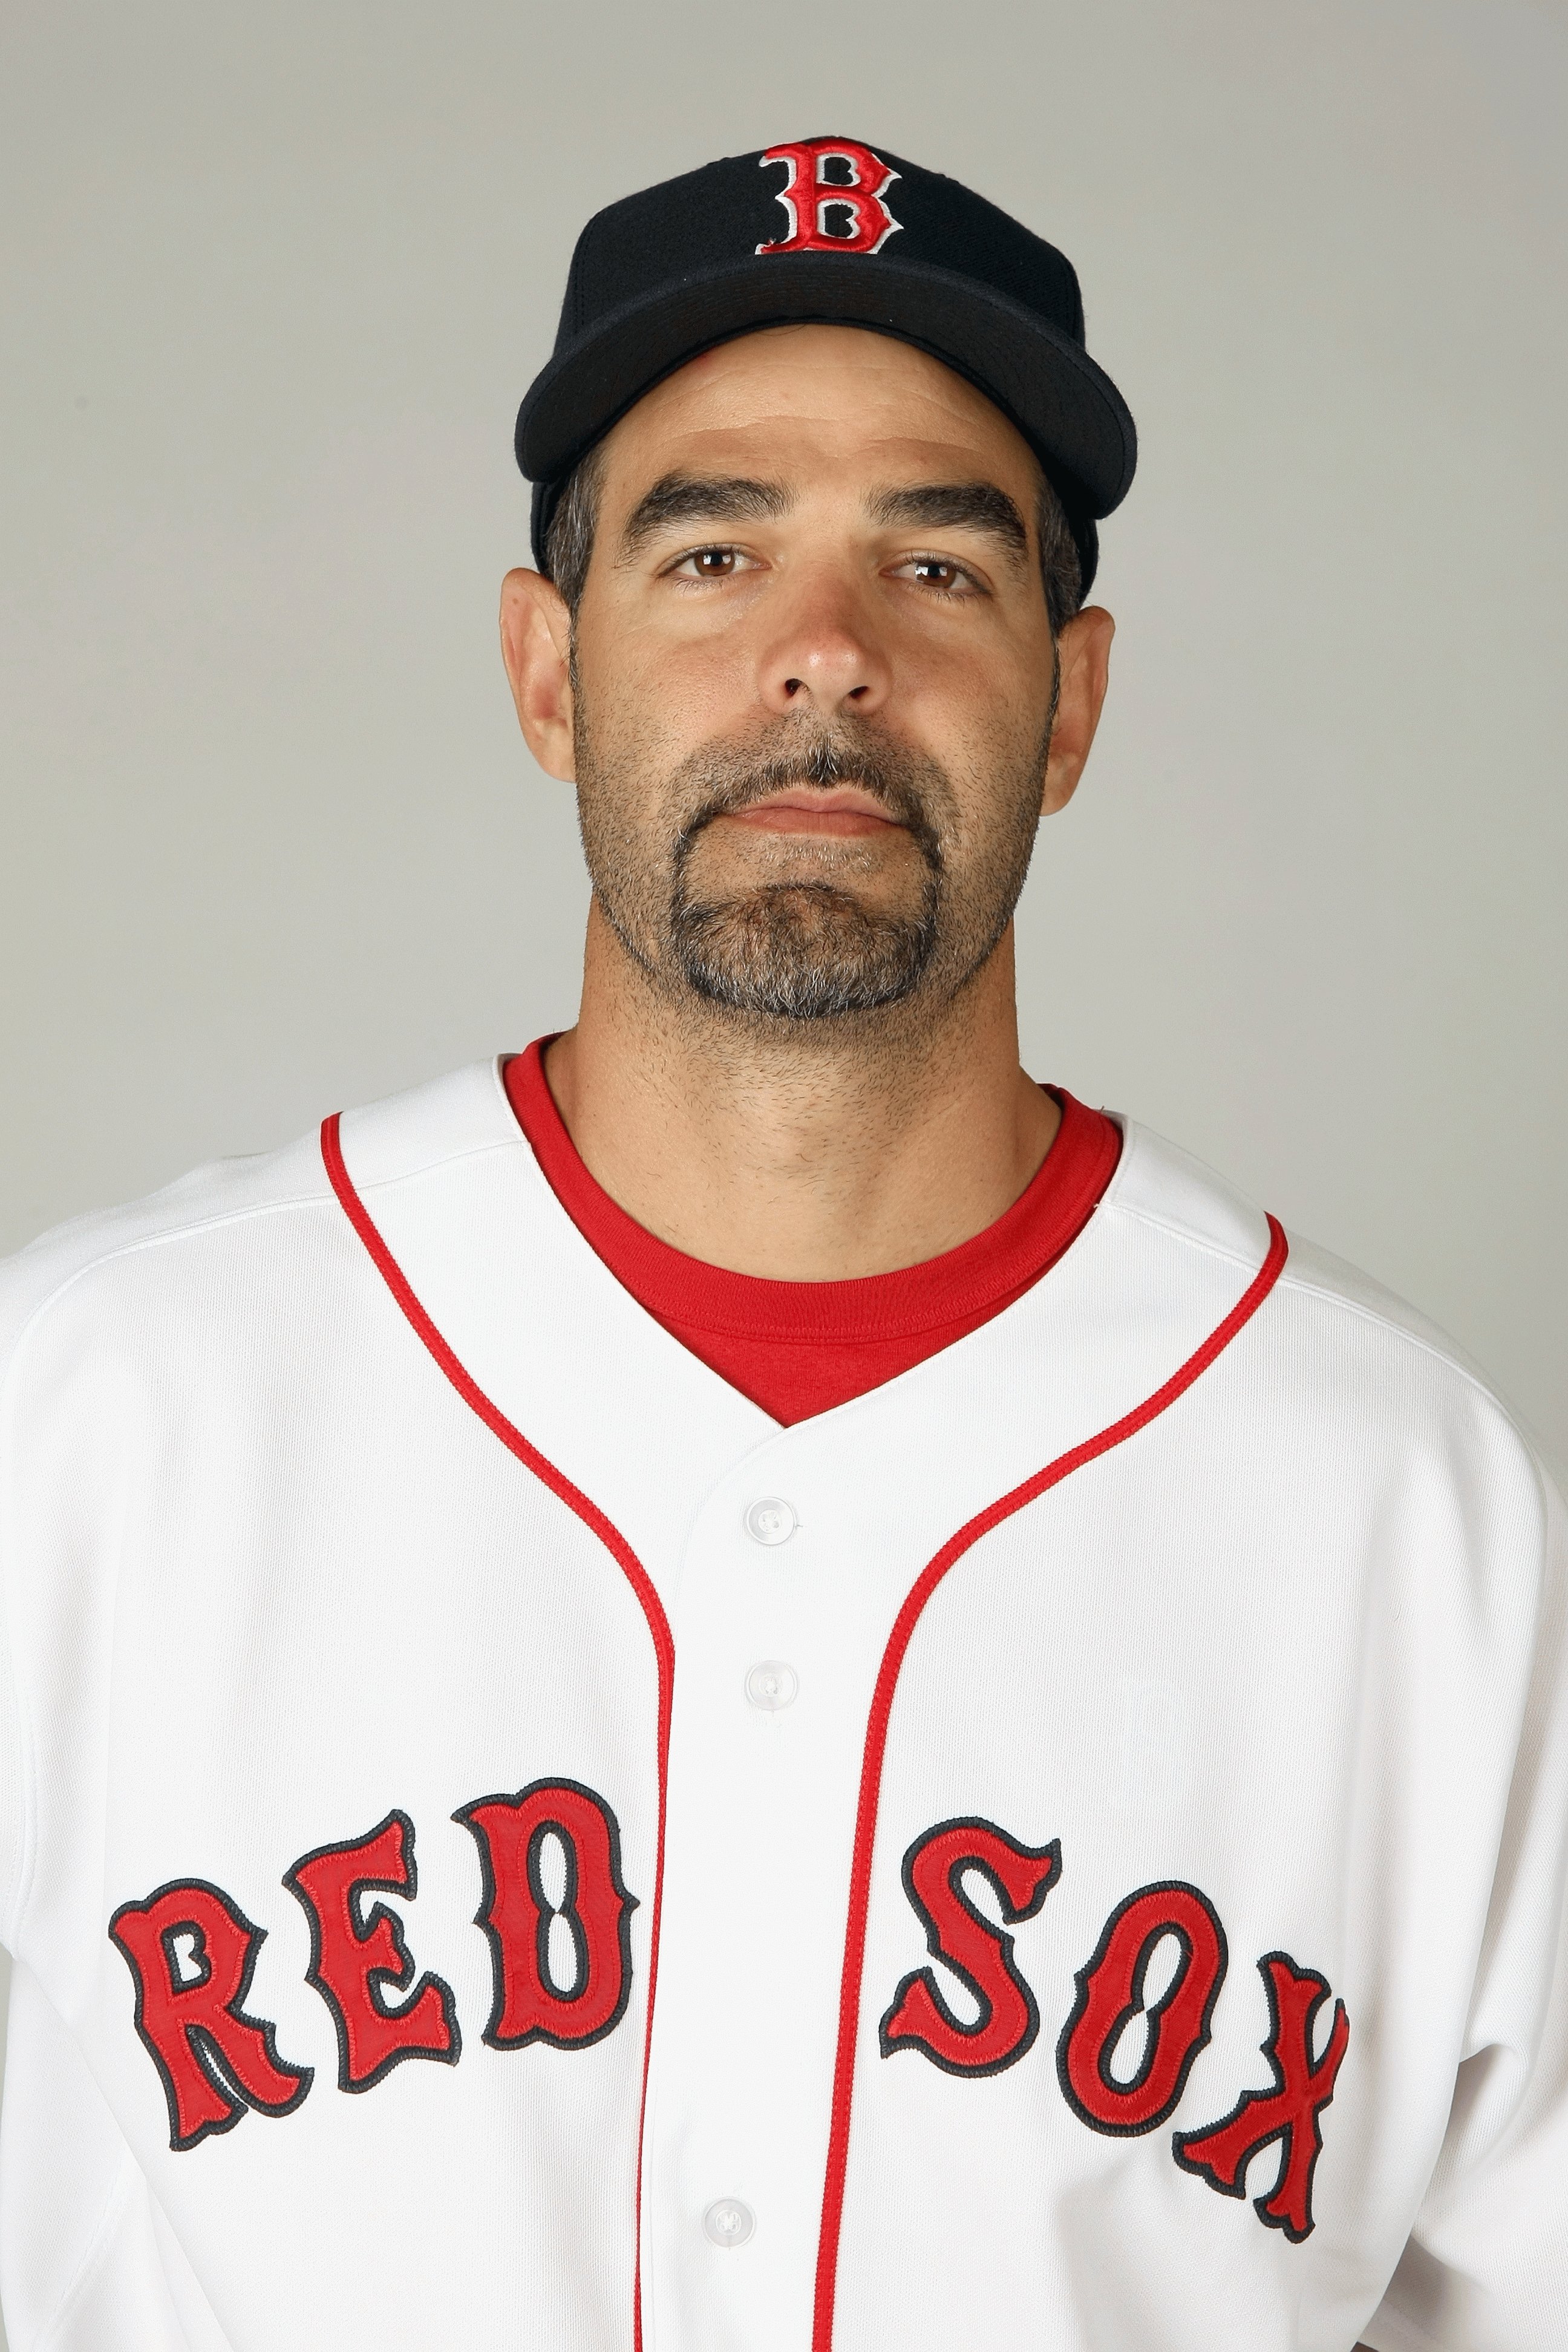 FORT MYERS,FLORIDA - FEBRUARY 22:  Mike Lowell #25 of the Boston Red Sox poses during photo day at the Red Sox spring training complex on February 22, 2009 in Fort Myers, Florida. (Photo by: Nick Laham/Getty Images)